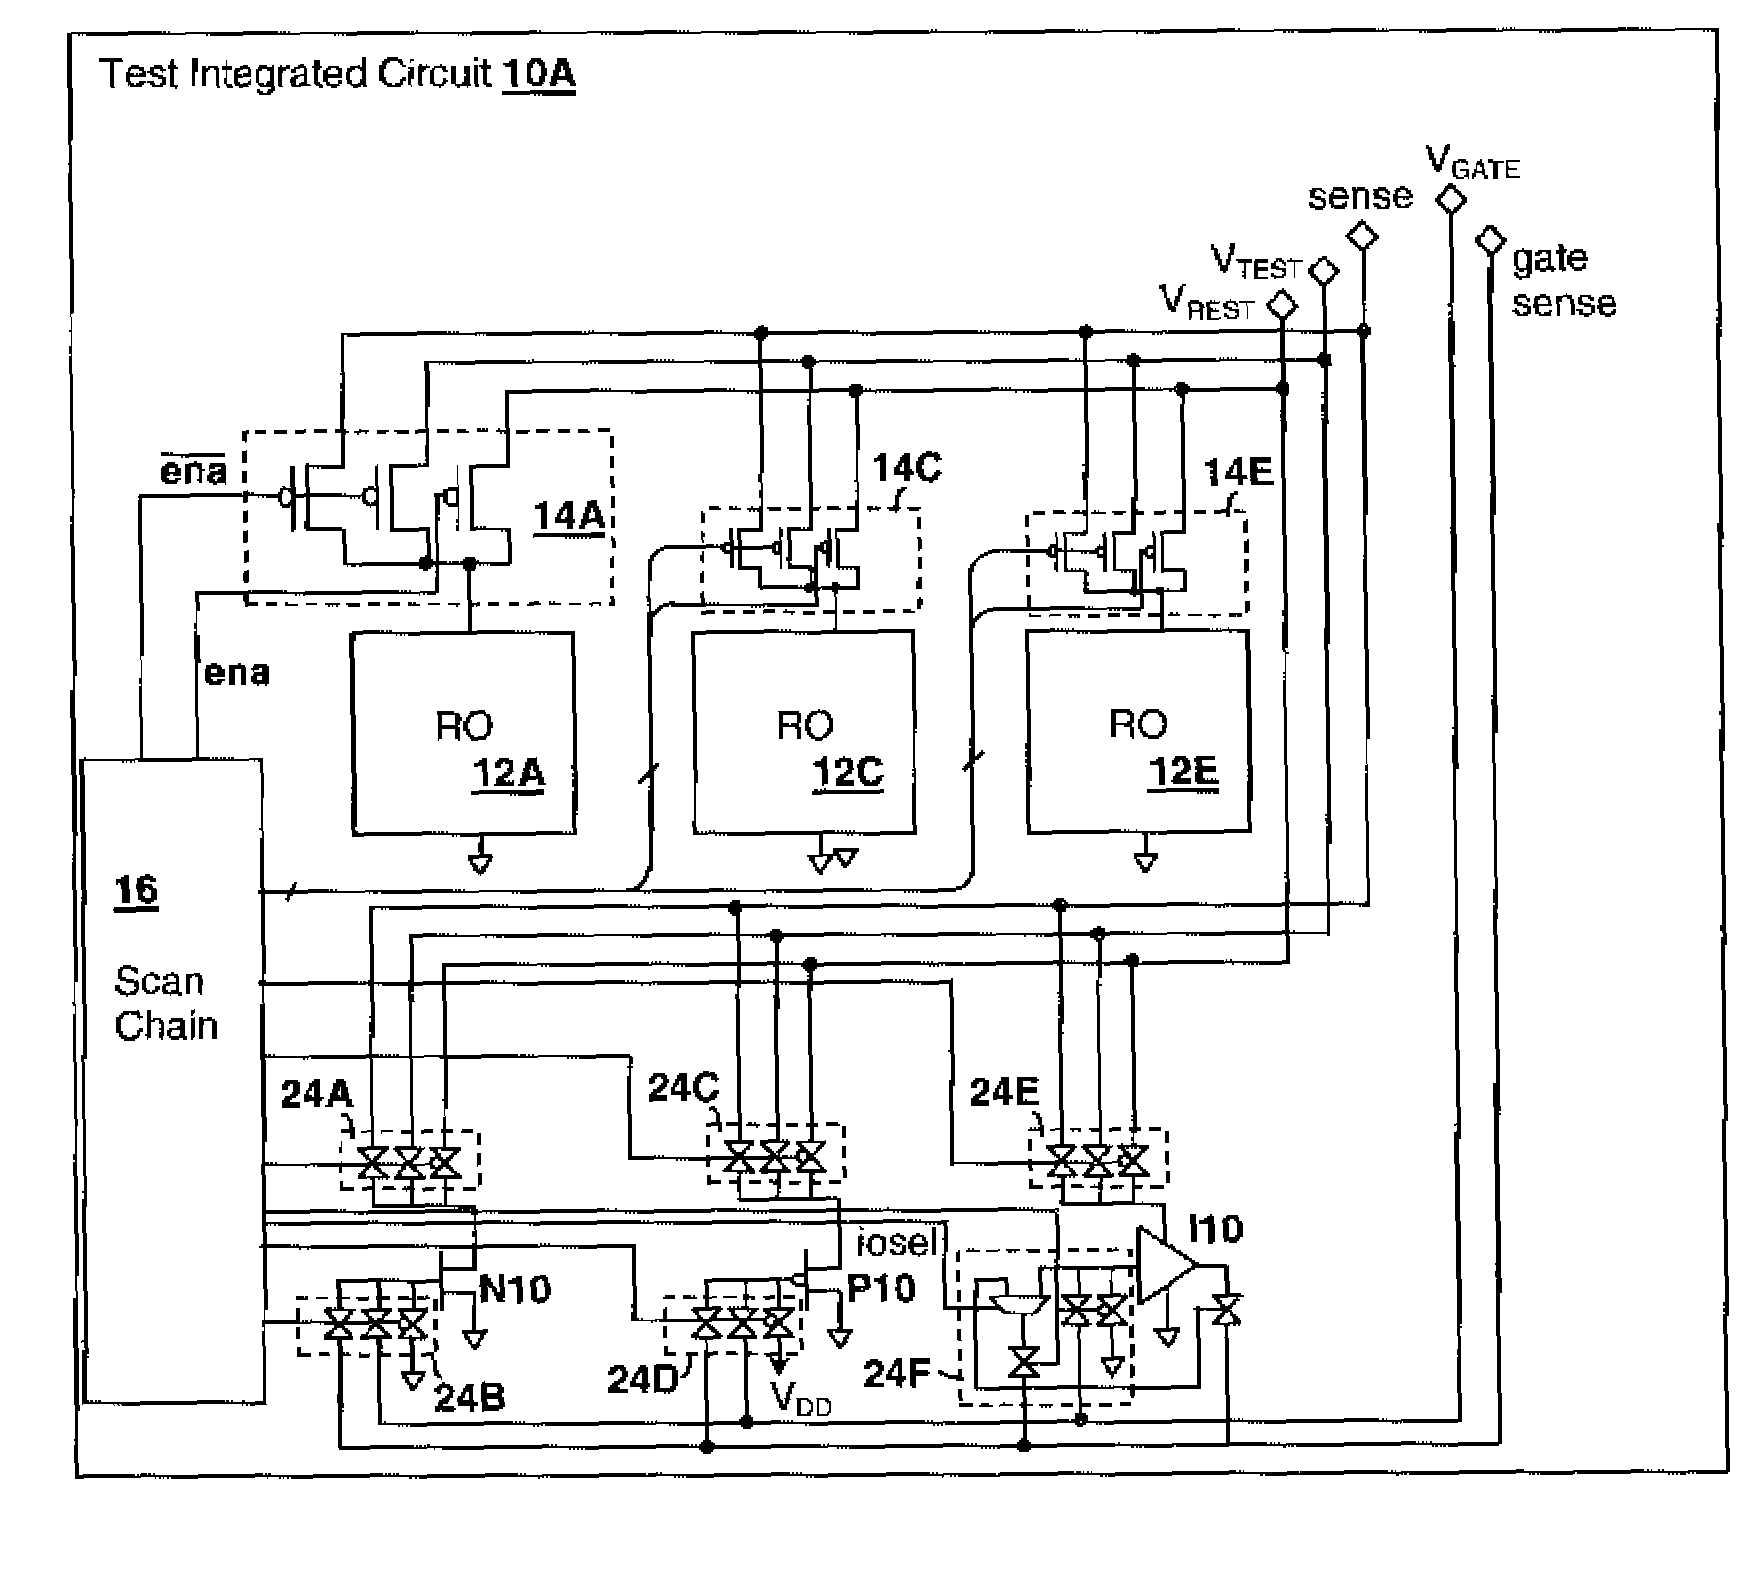 Method and Circuit for Measuring Operating and Leakage Current of Individual Blocks Within an Array of Test Circuit Blocks